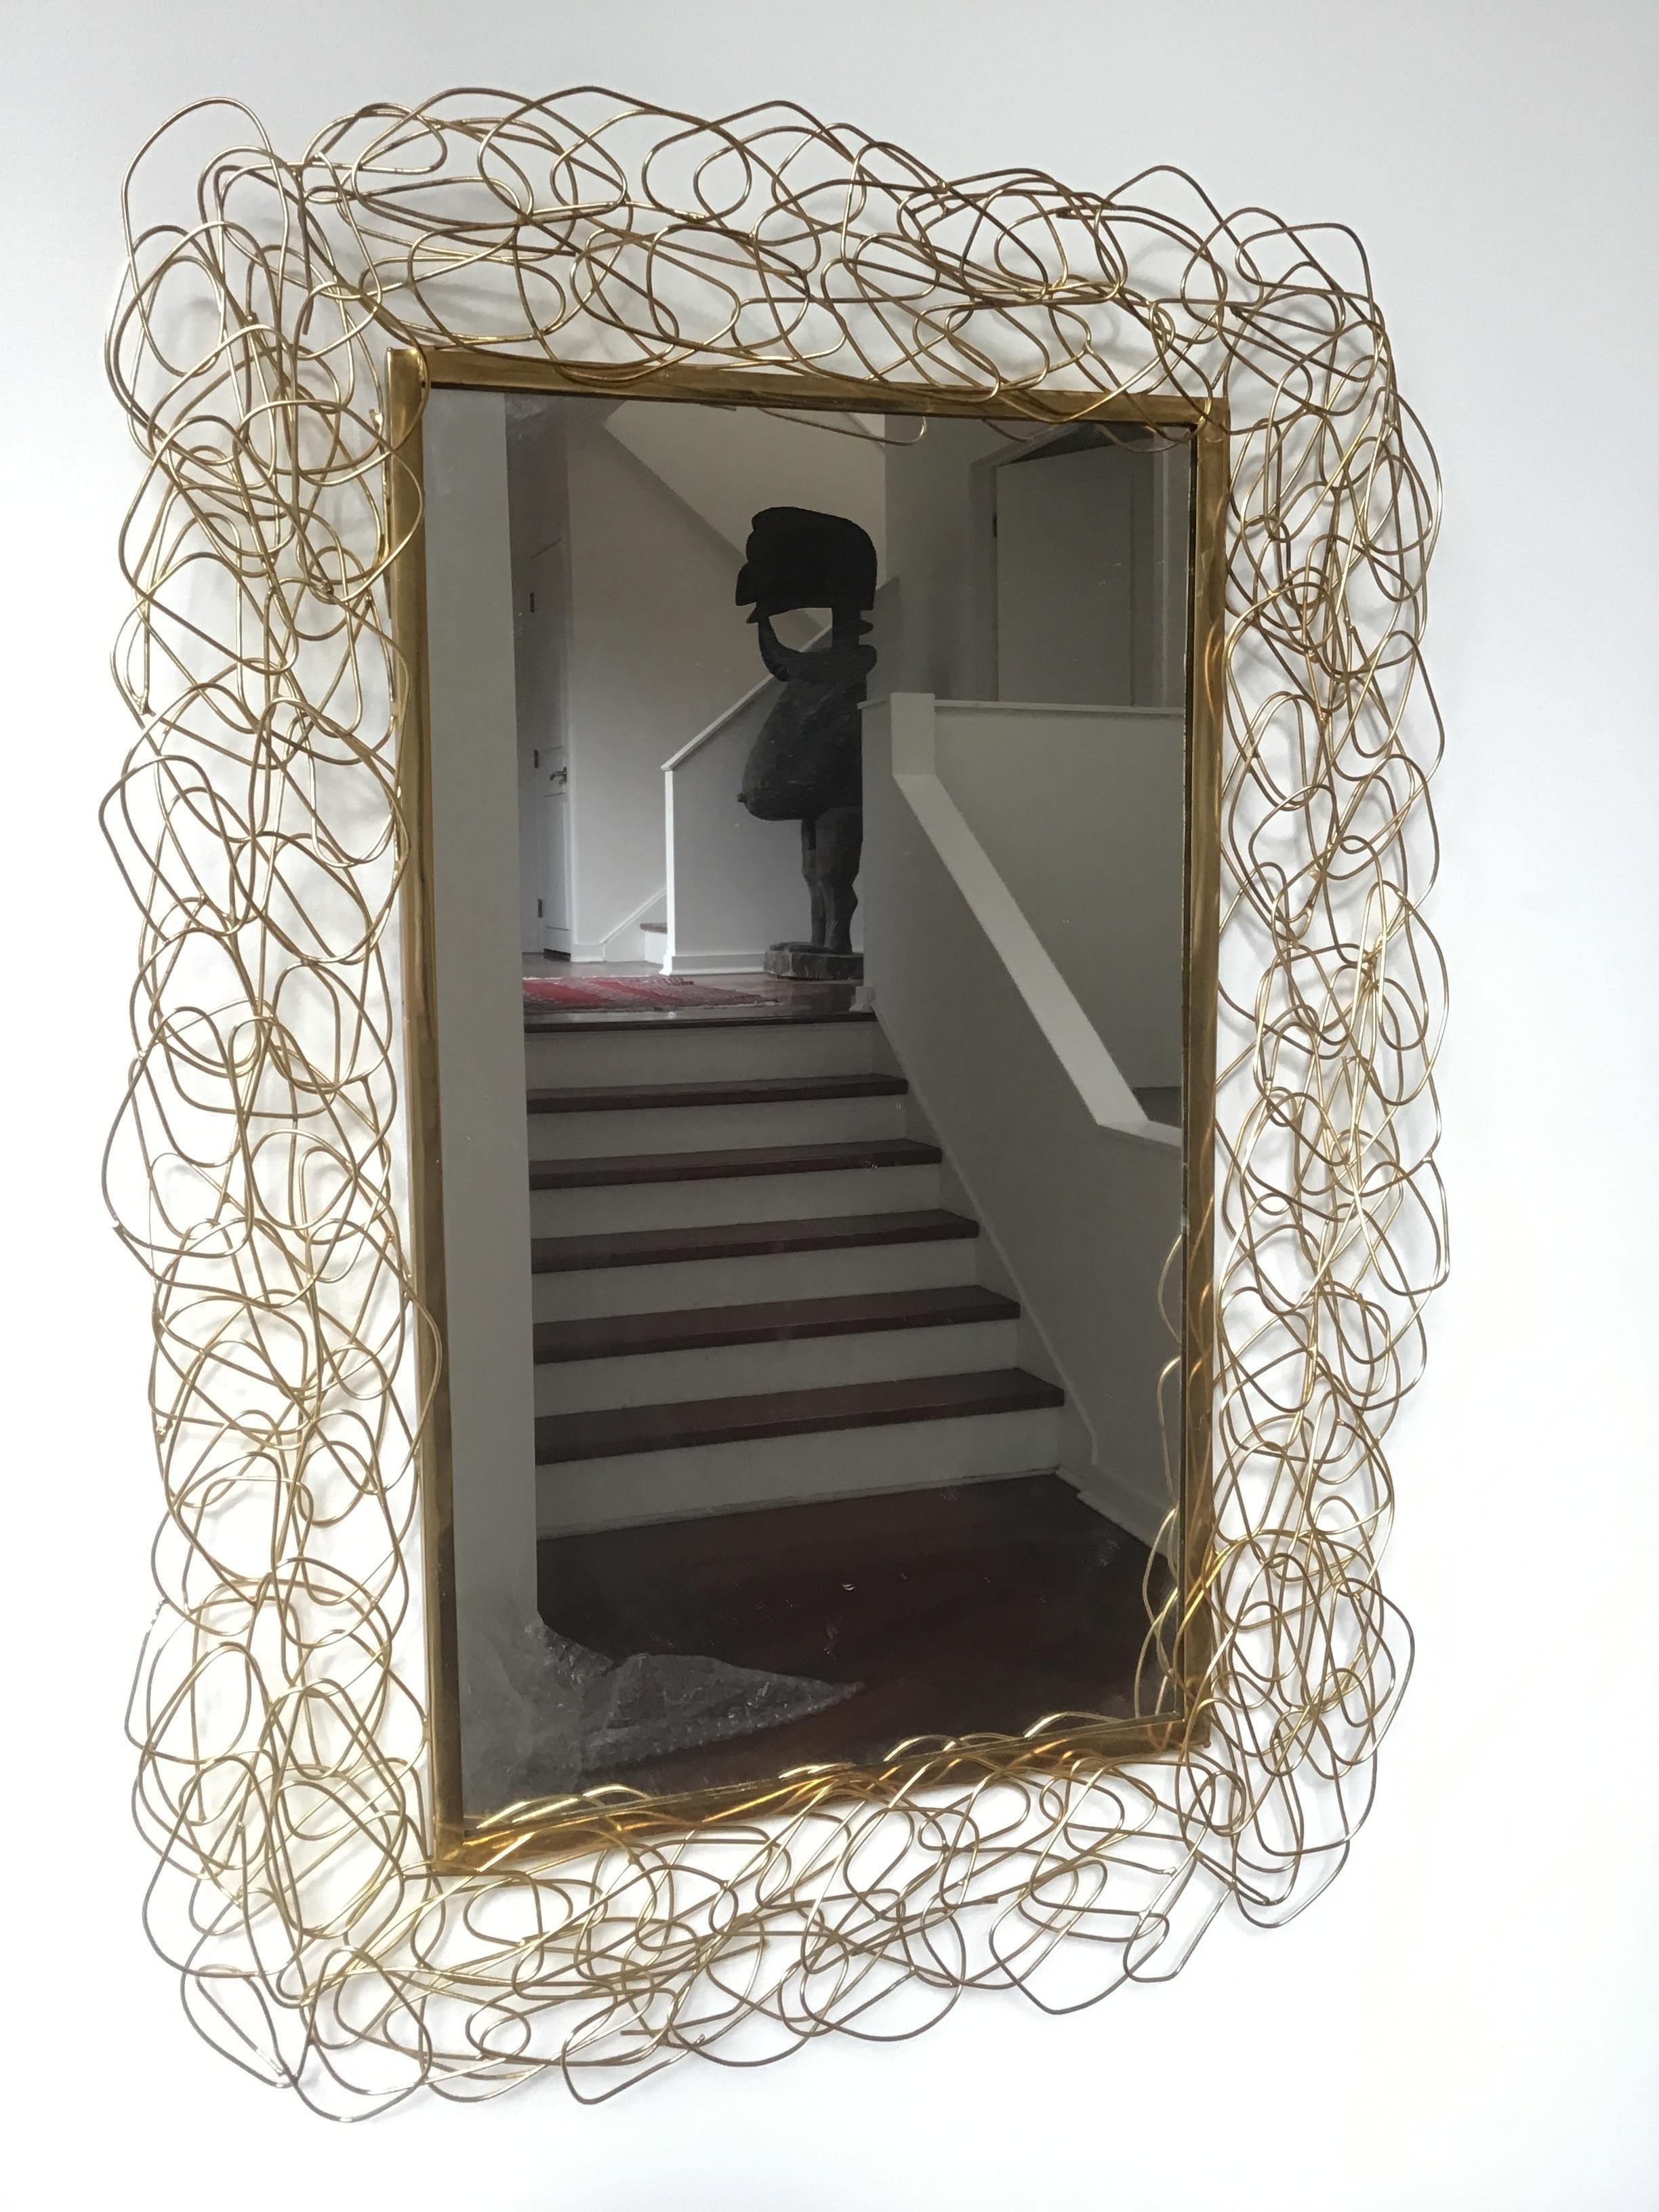 Brass wire mirror.
This item can be shipped via UPS.